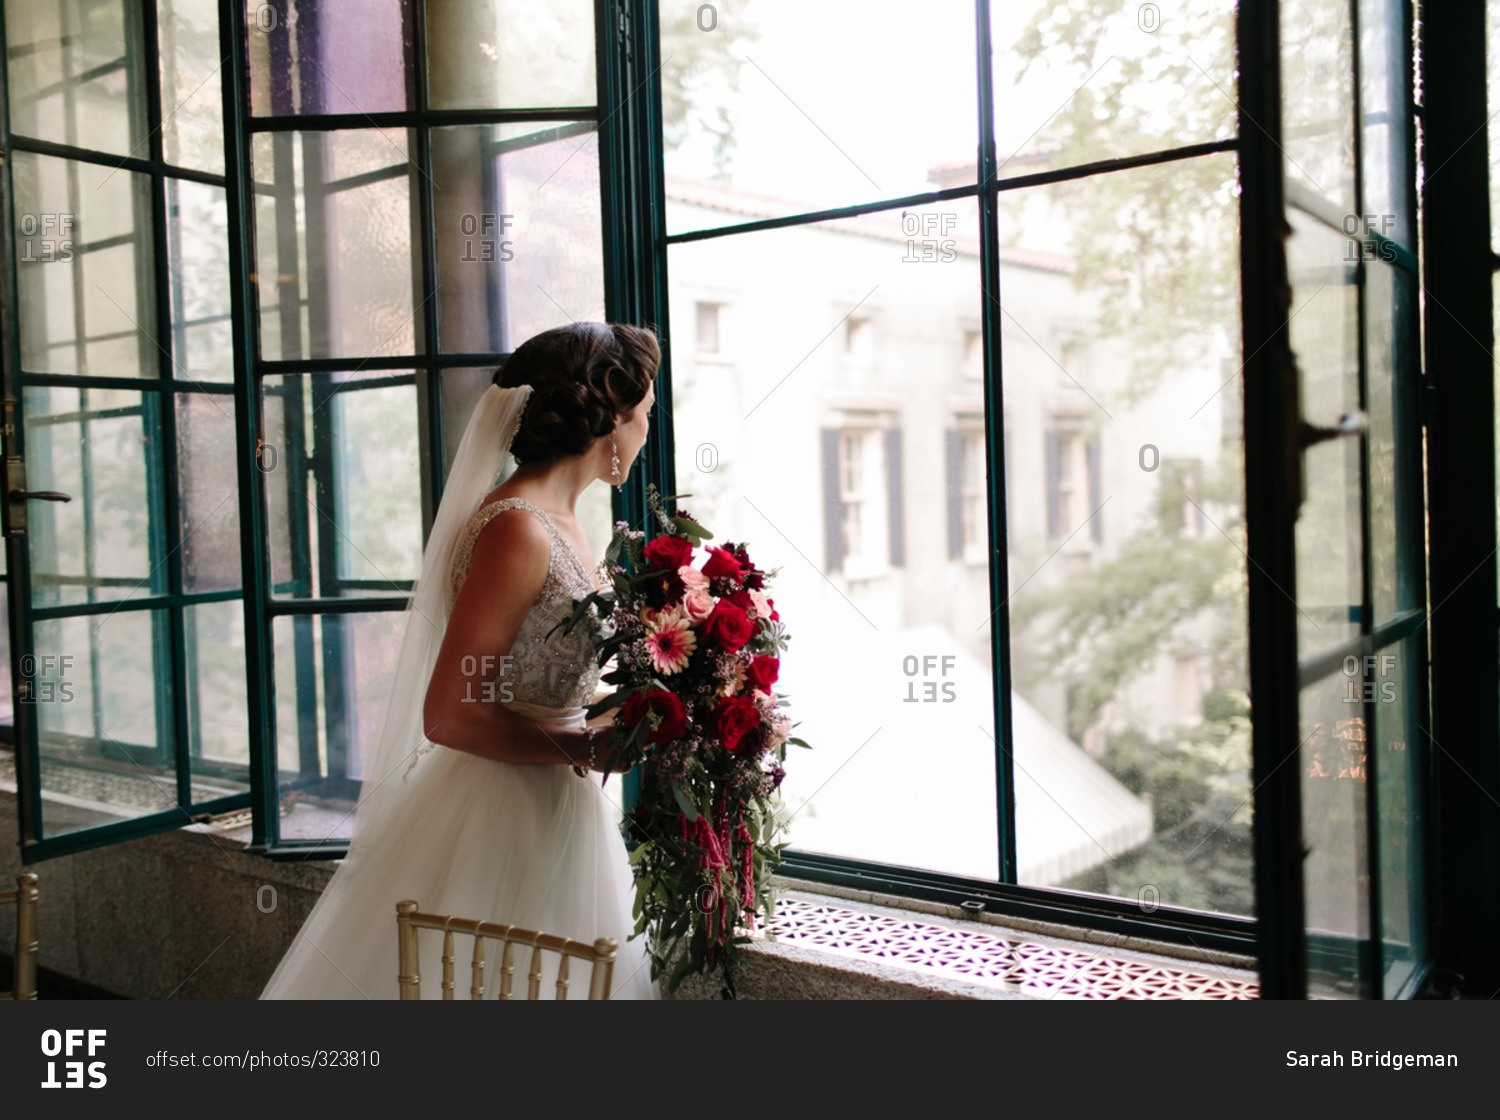 Bride holding a bouquet of flowers and looking out the window